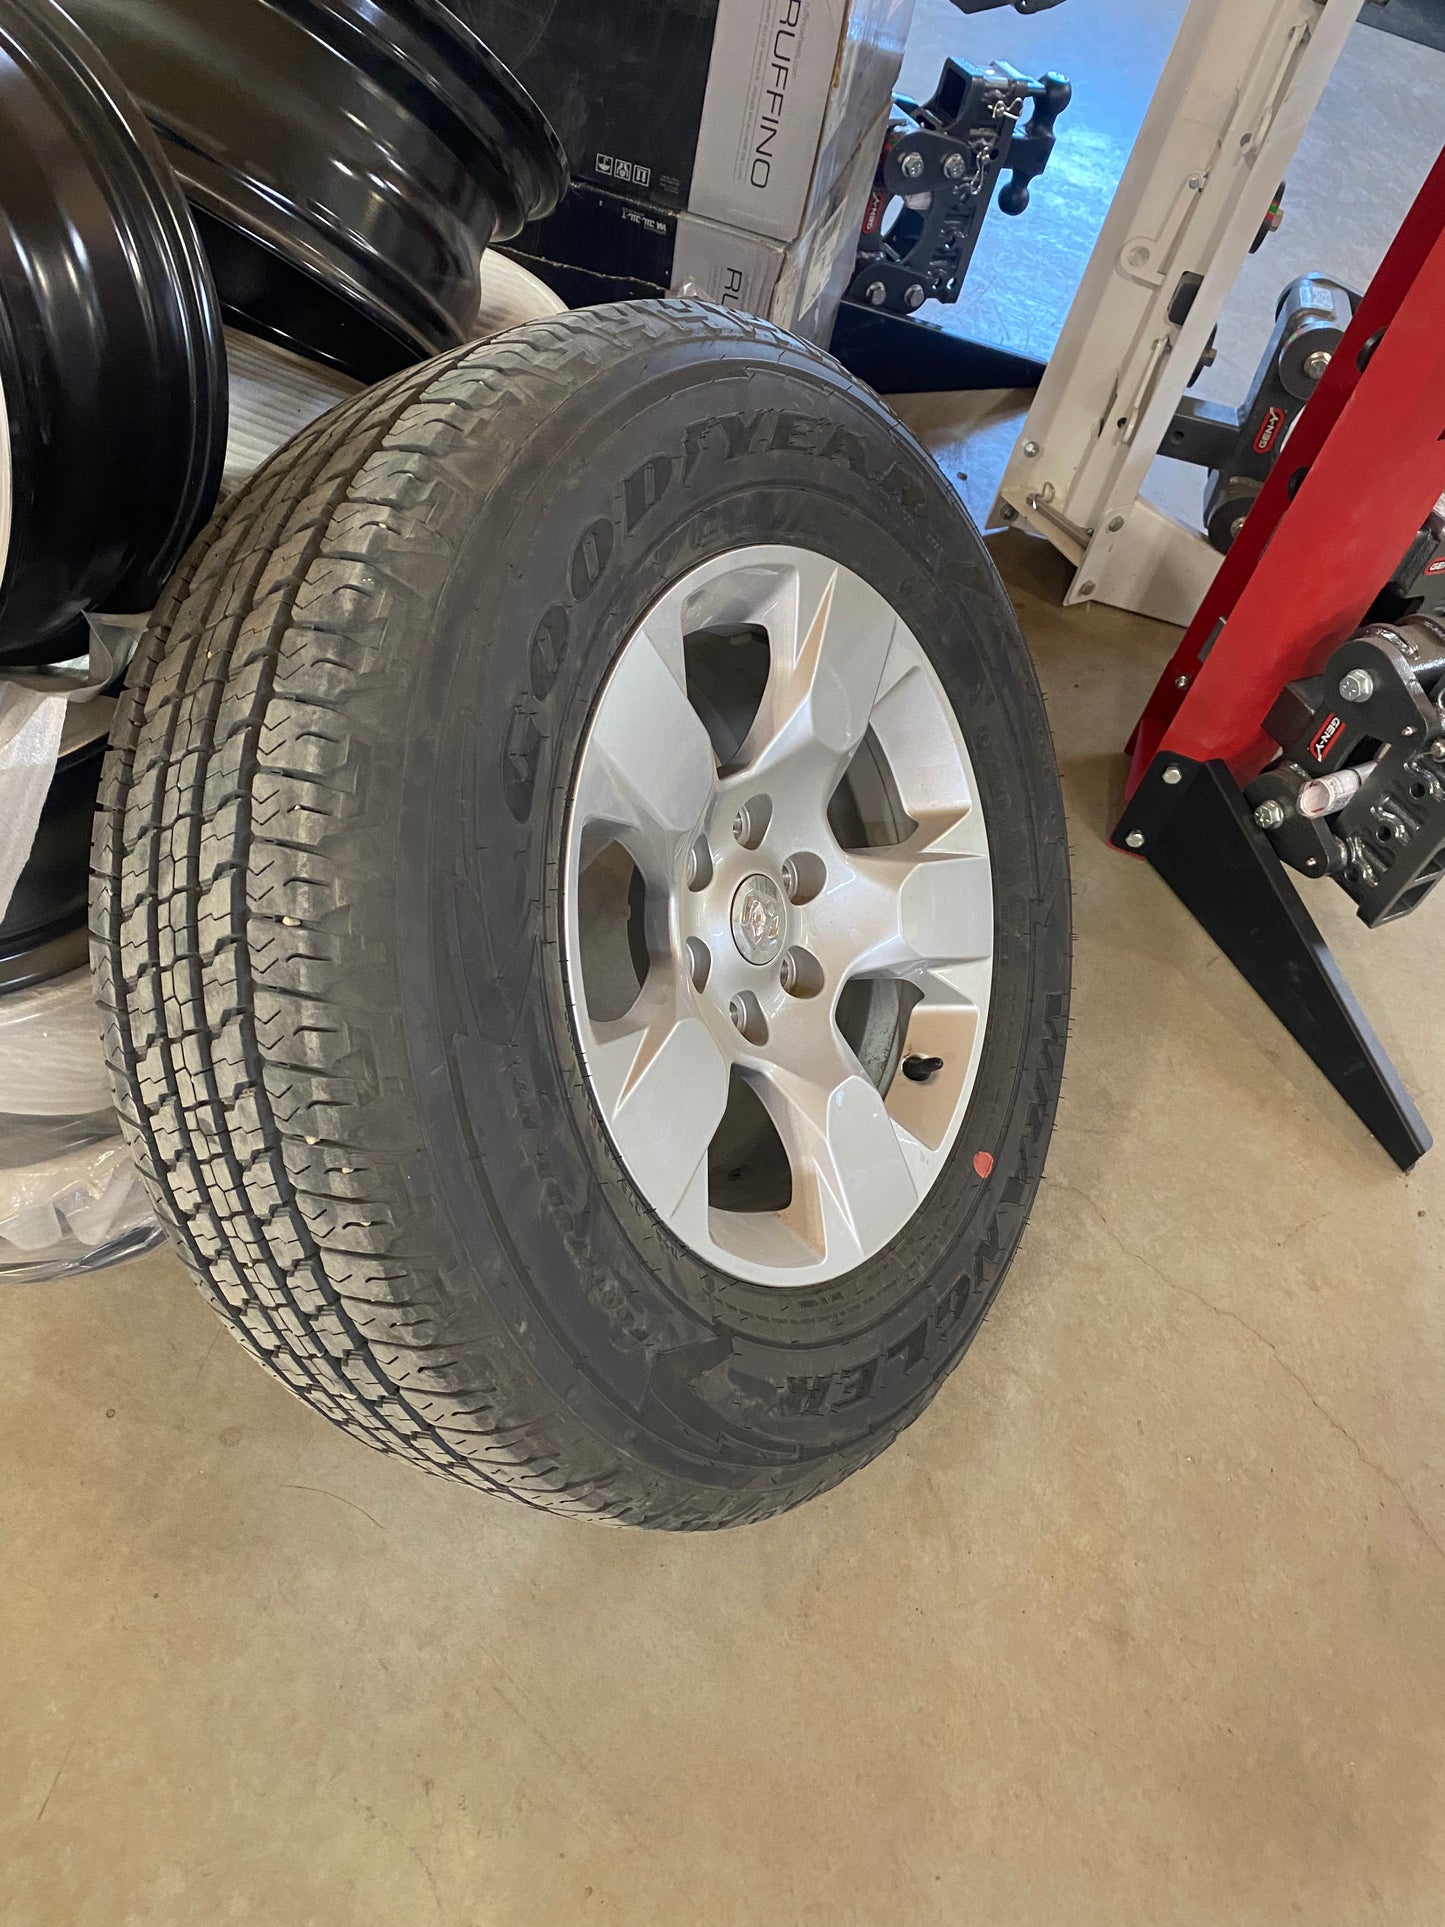 2022 Ram 1500 Rims and Tires (comes in a set of 4)